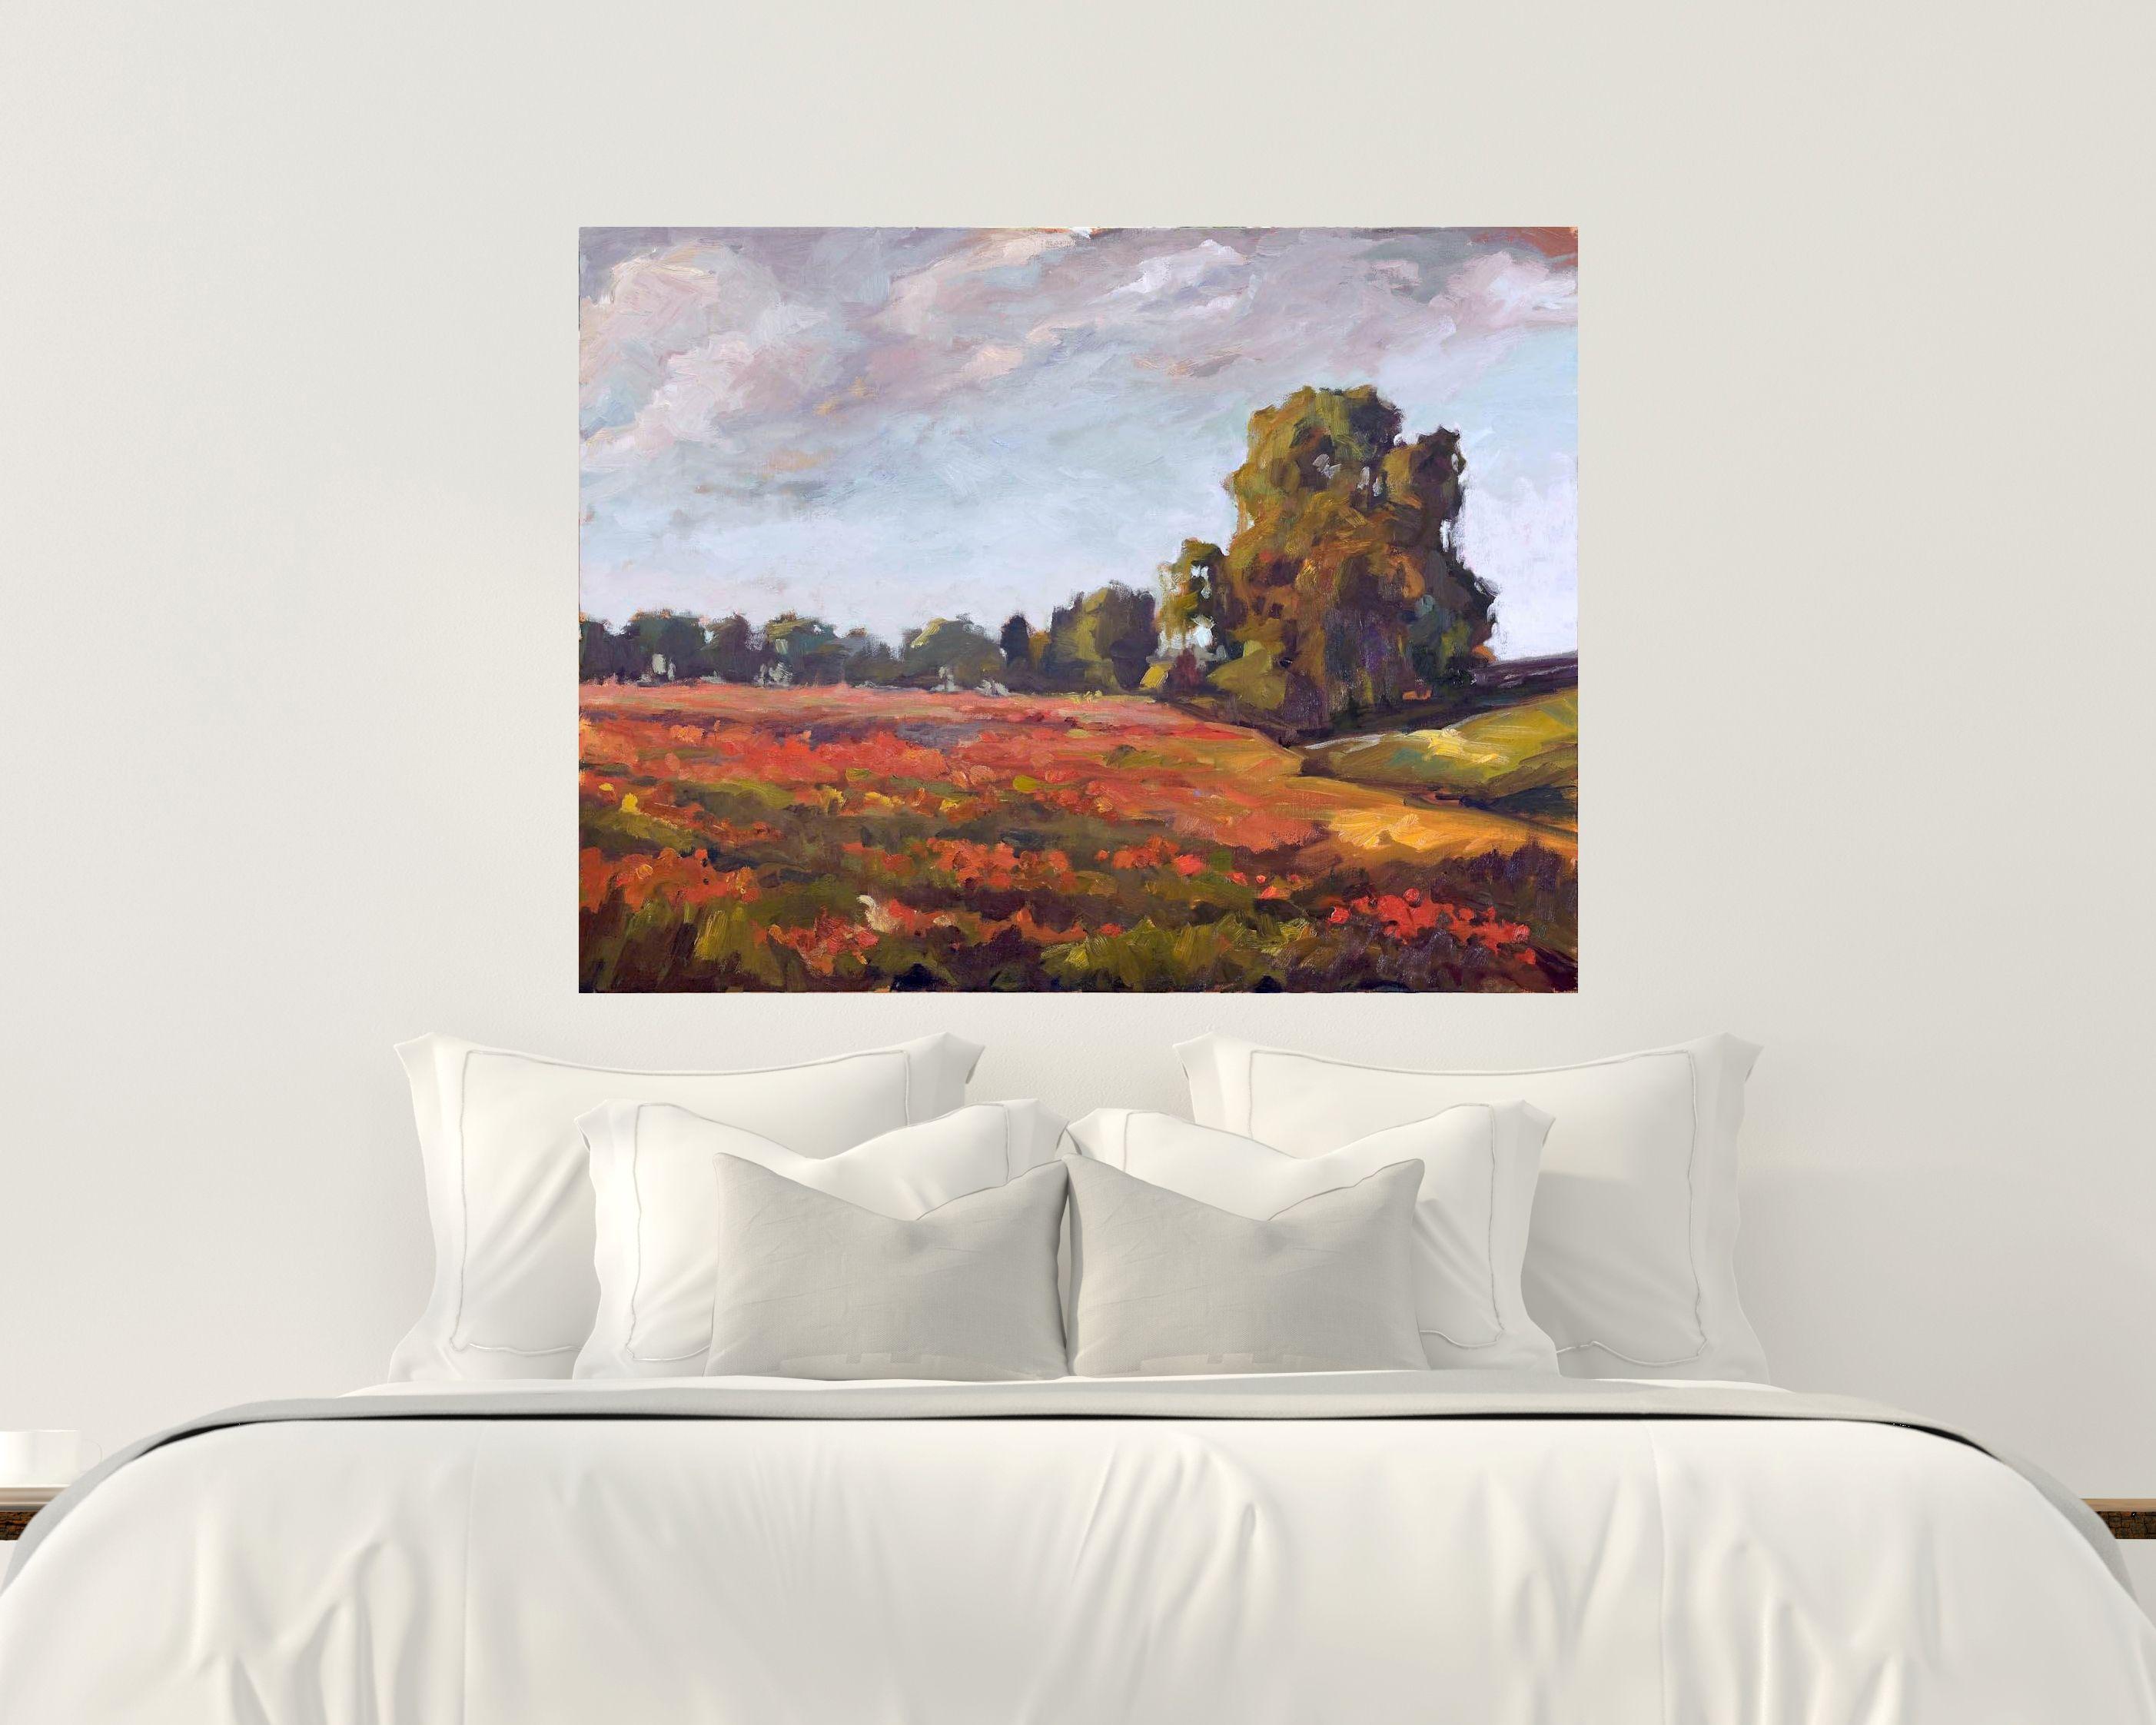 SEA OF POPPIES Contemporary Rural Landscape Fine Art on Giclee Canvas: 48